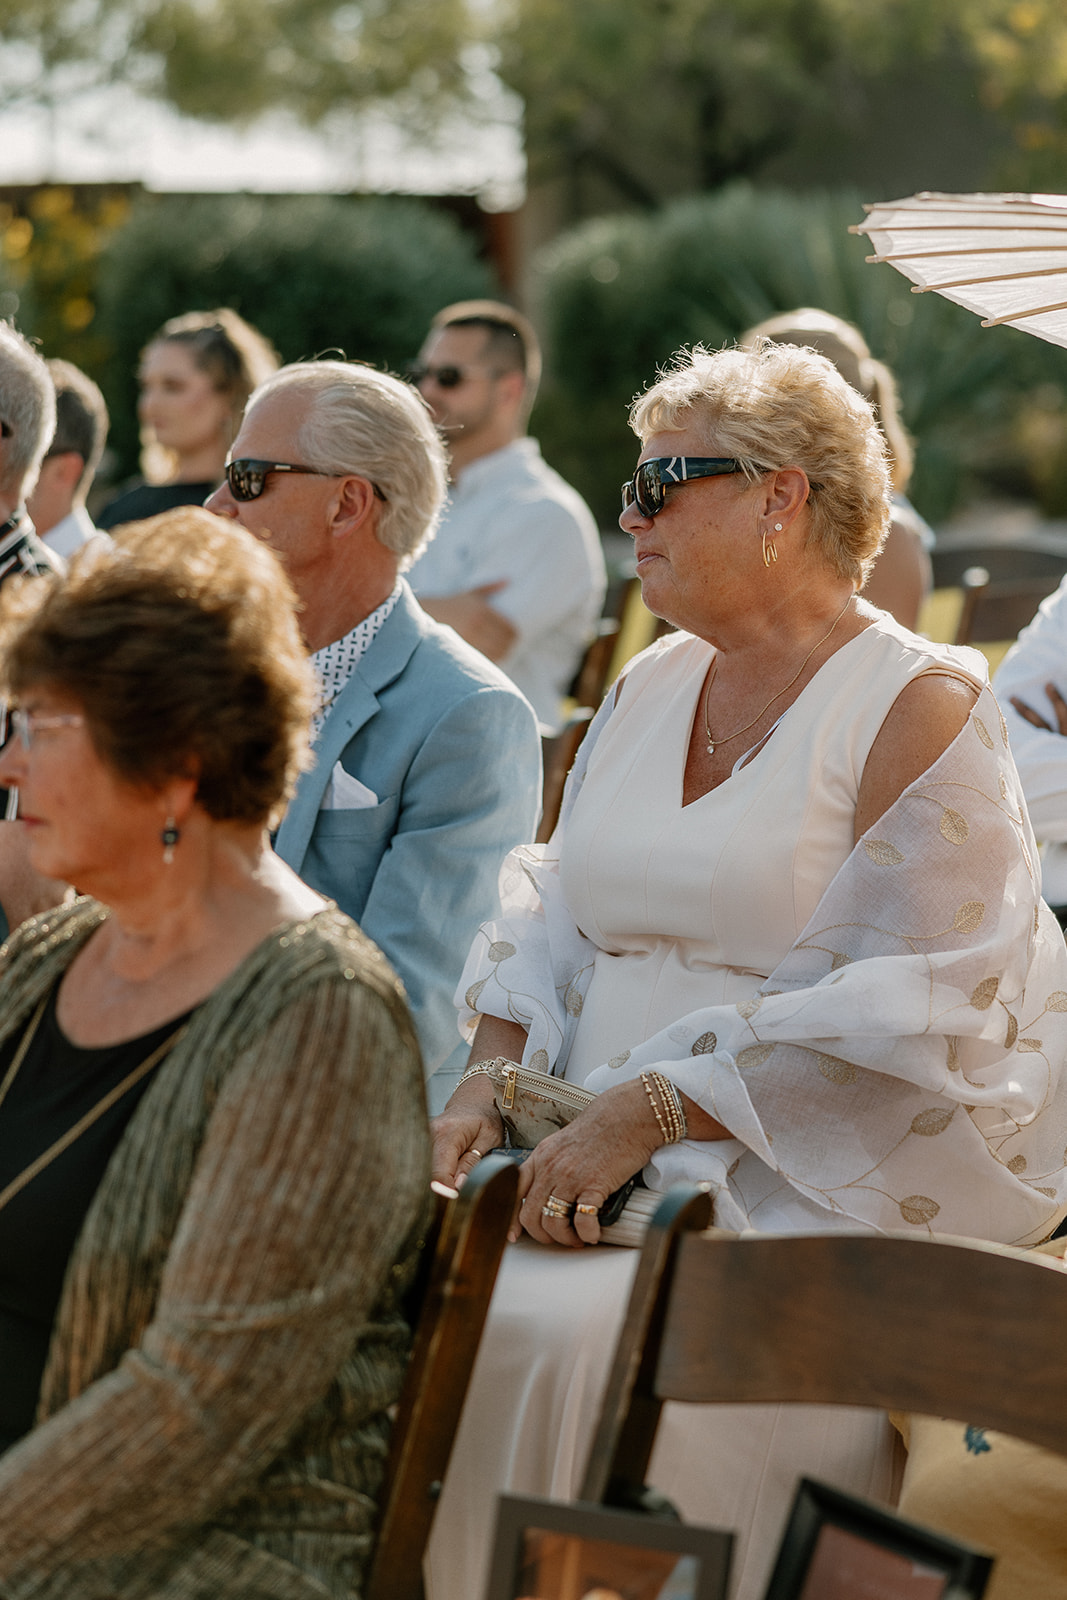 Guests sit and watch as the Arizona desert wedding takes place